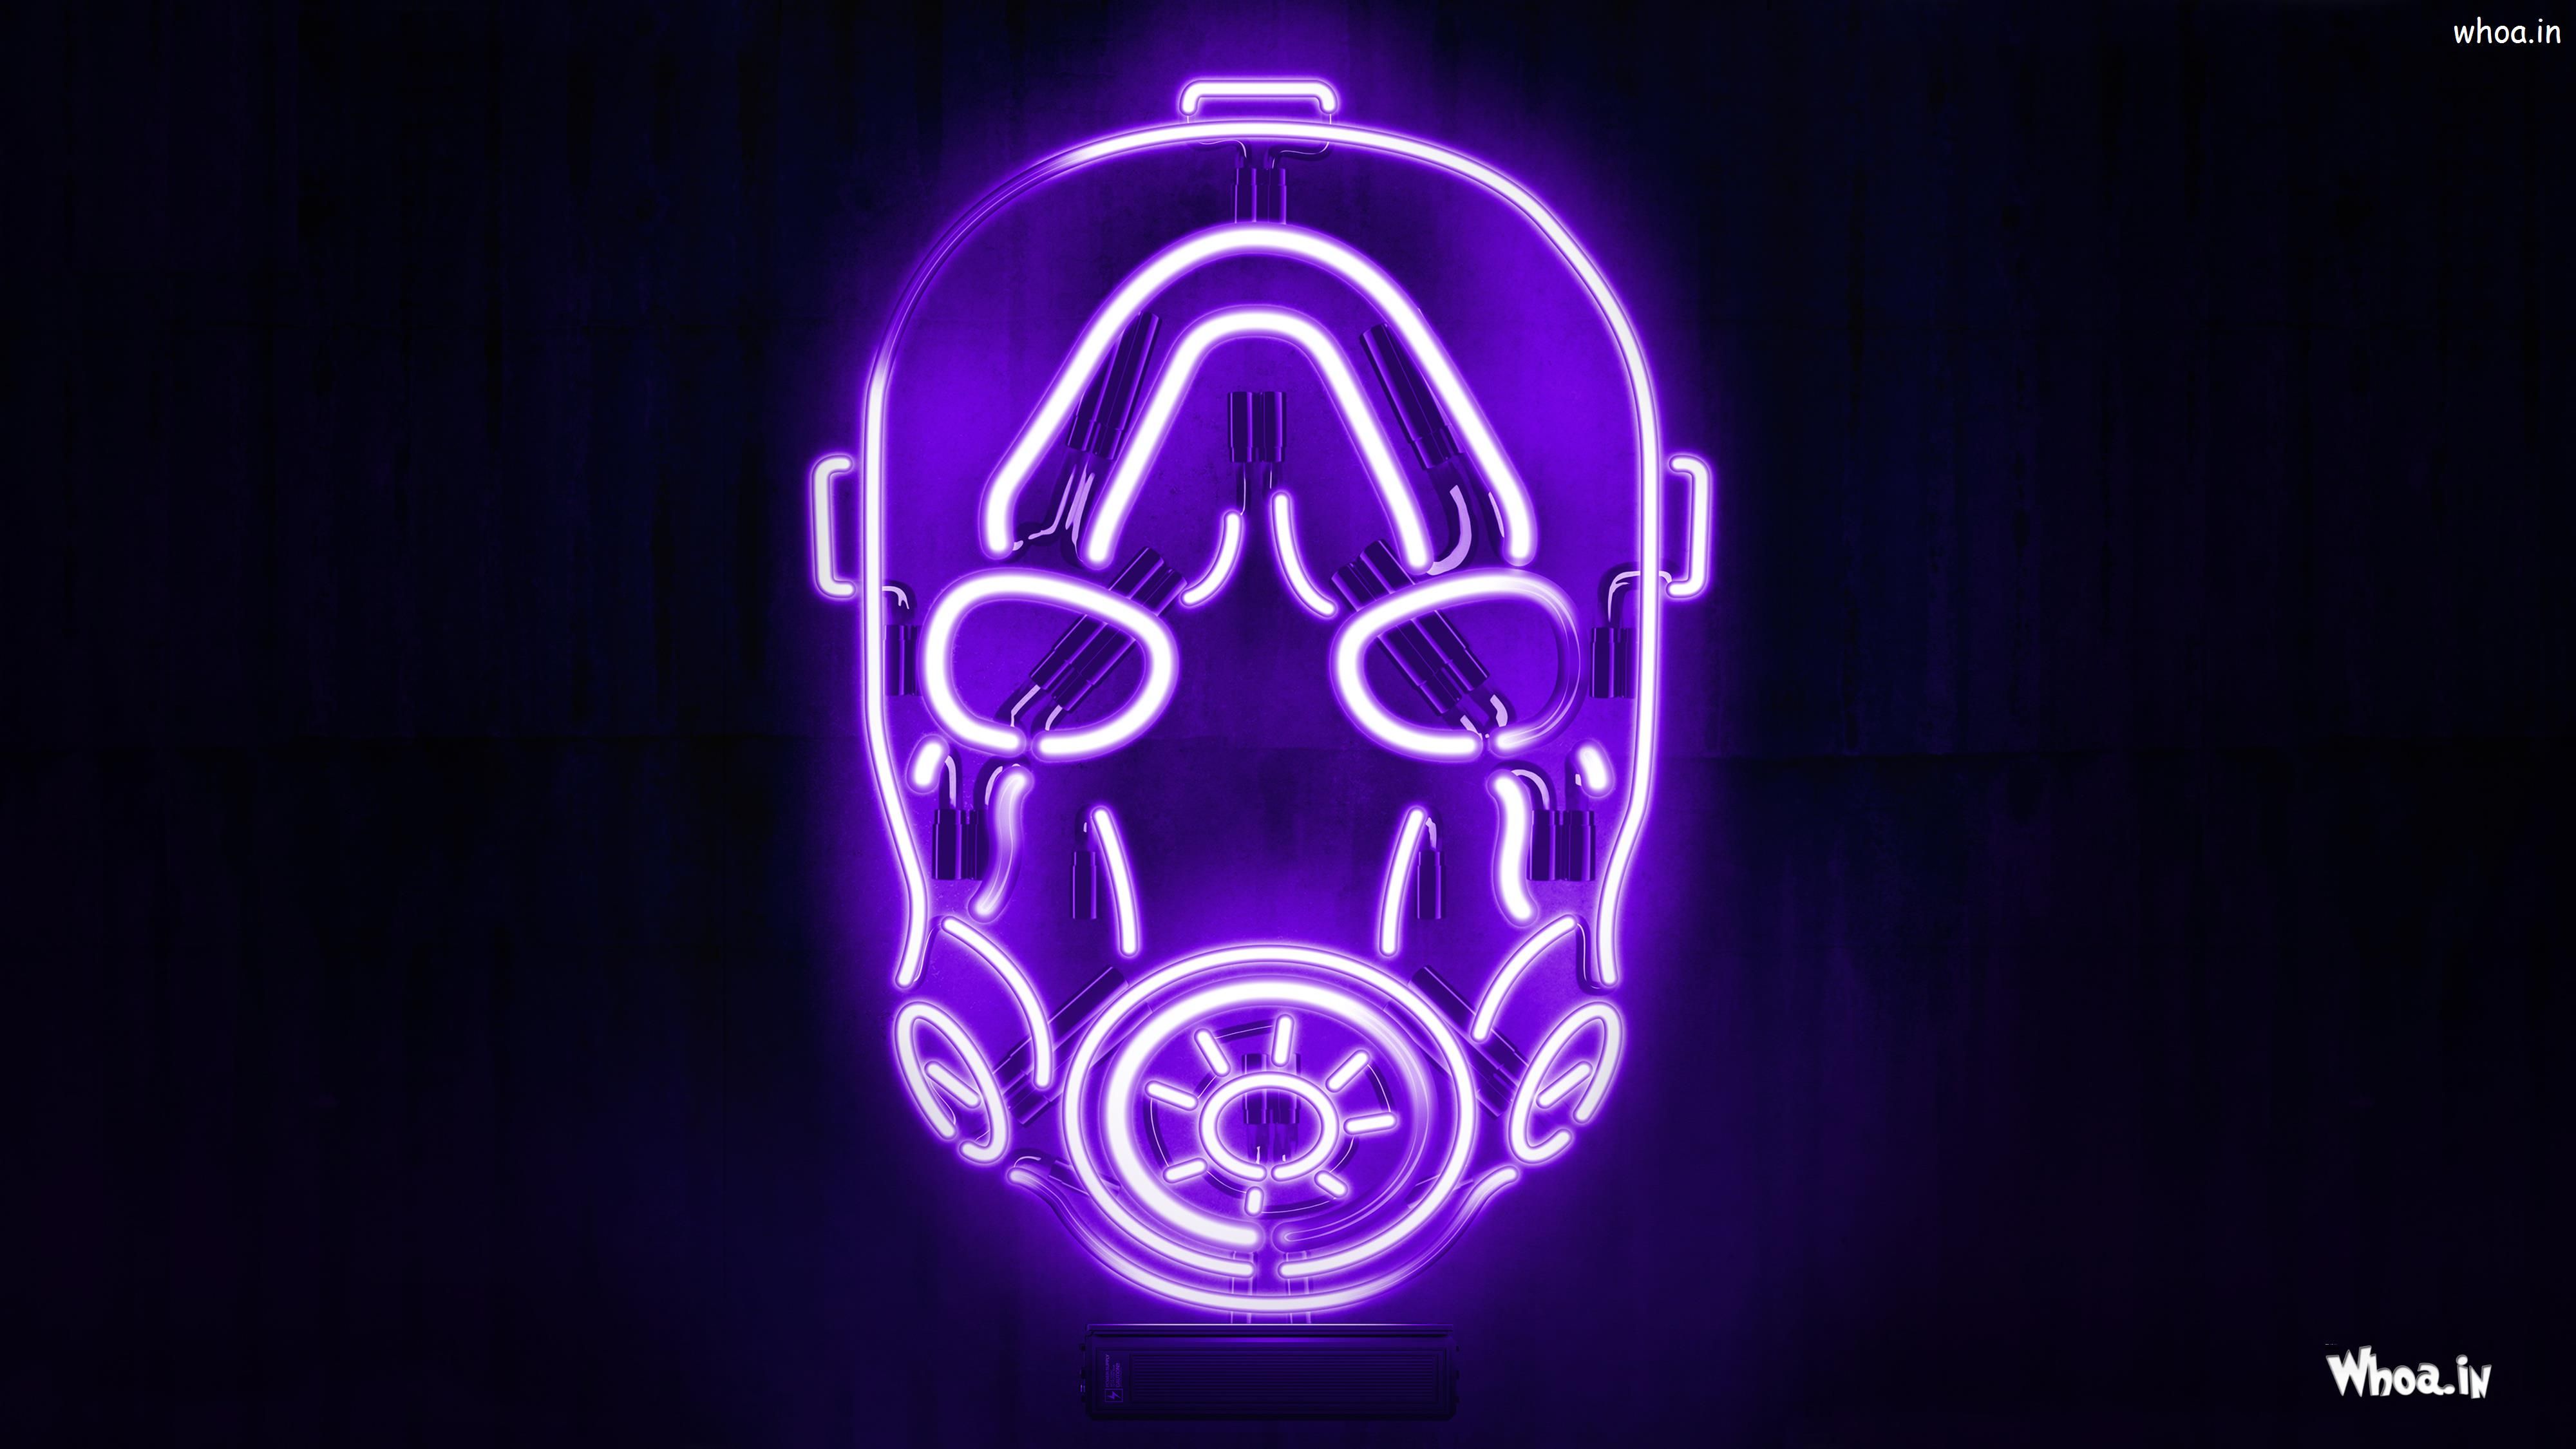 Border Lands Neon Mask HD Wallpaper And Image Of Wallpaper Neon